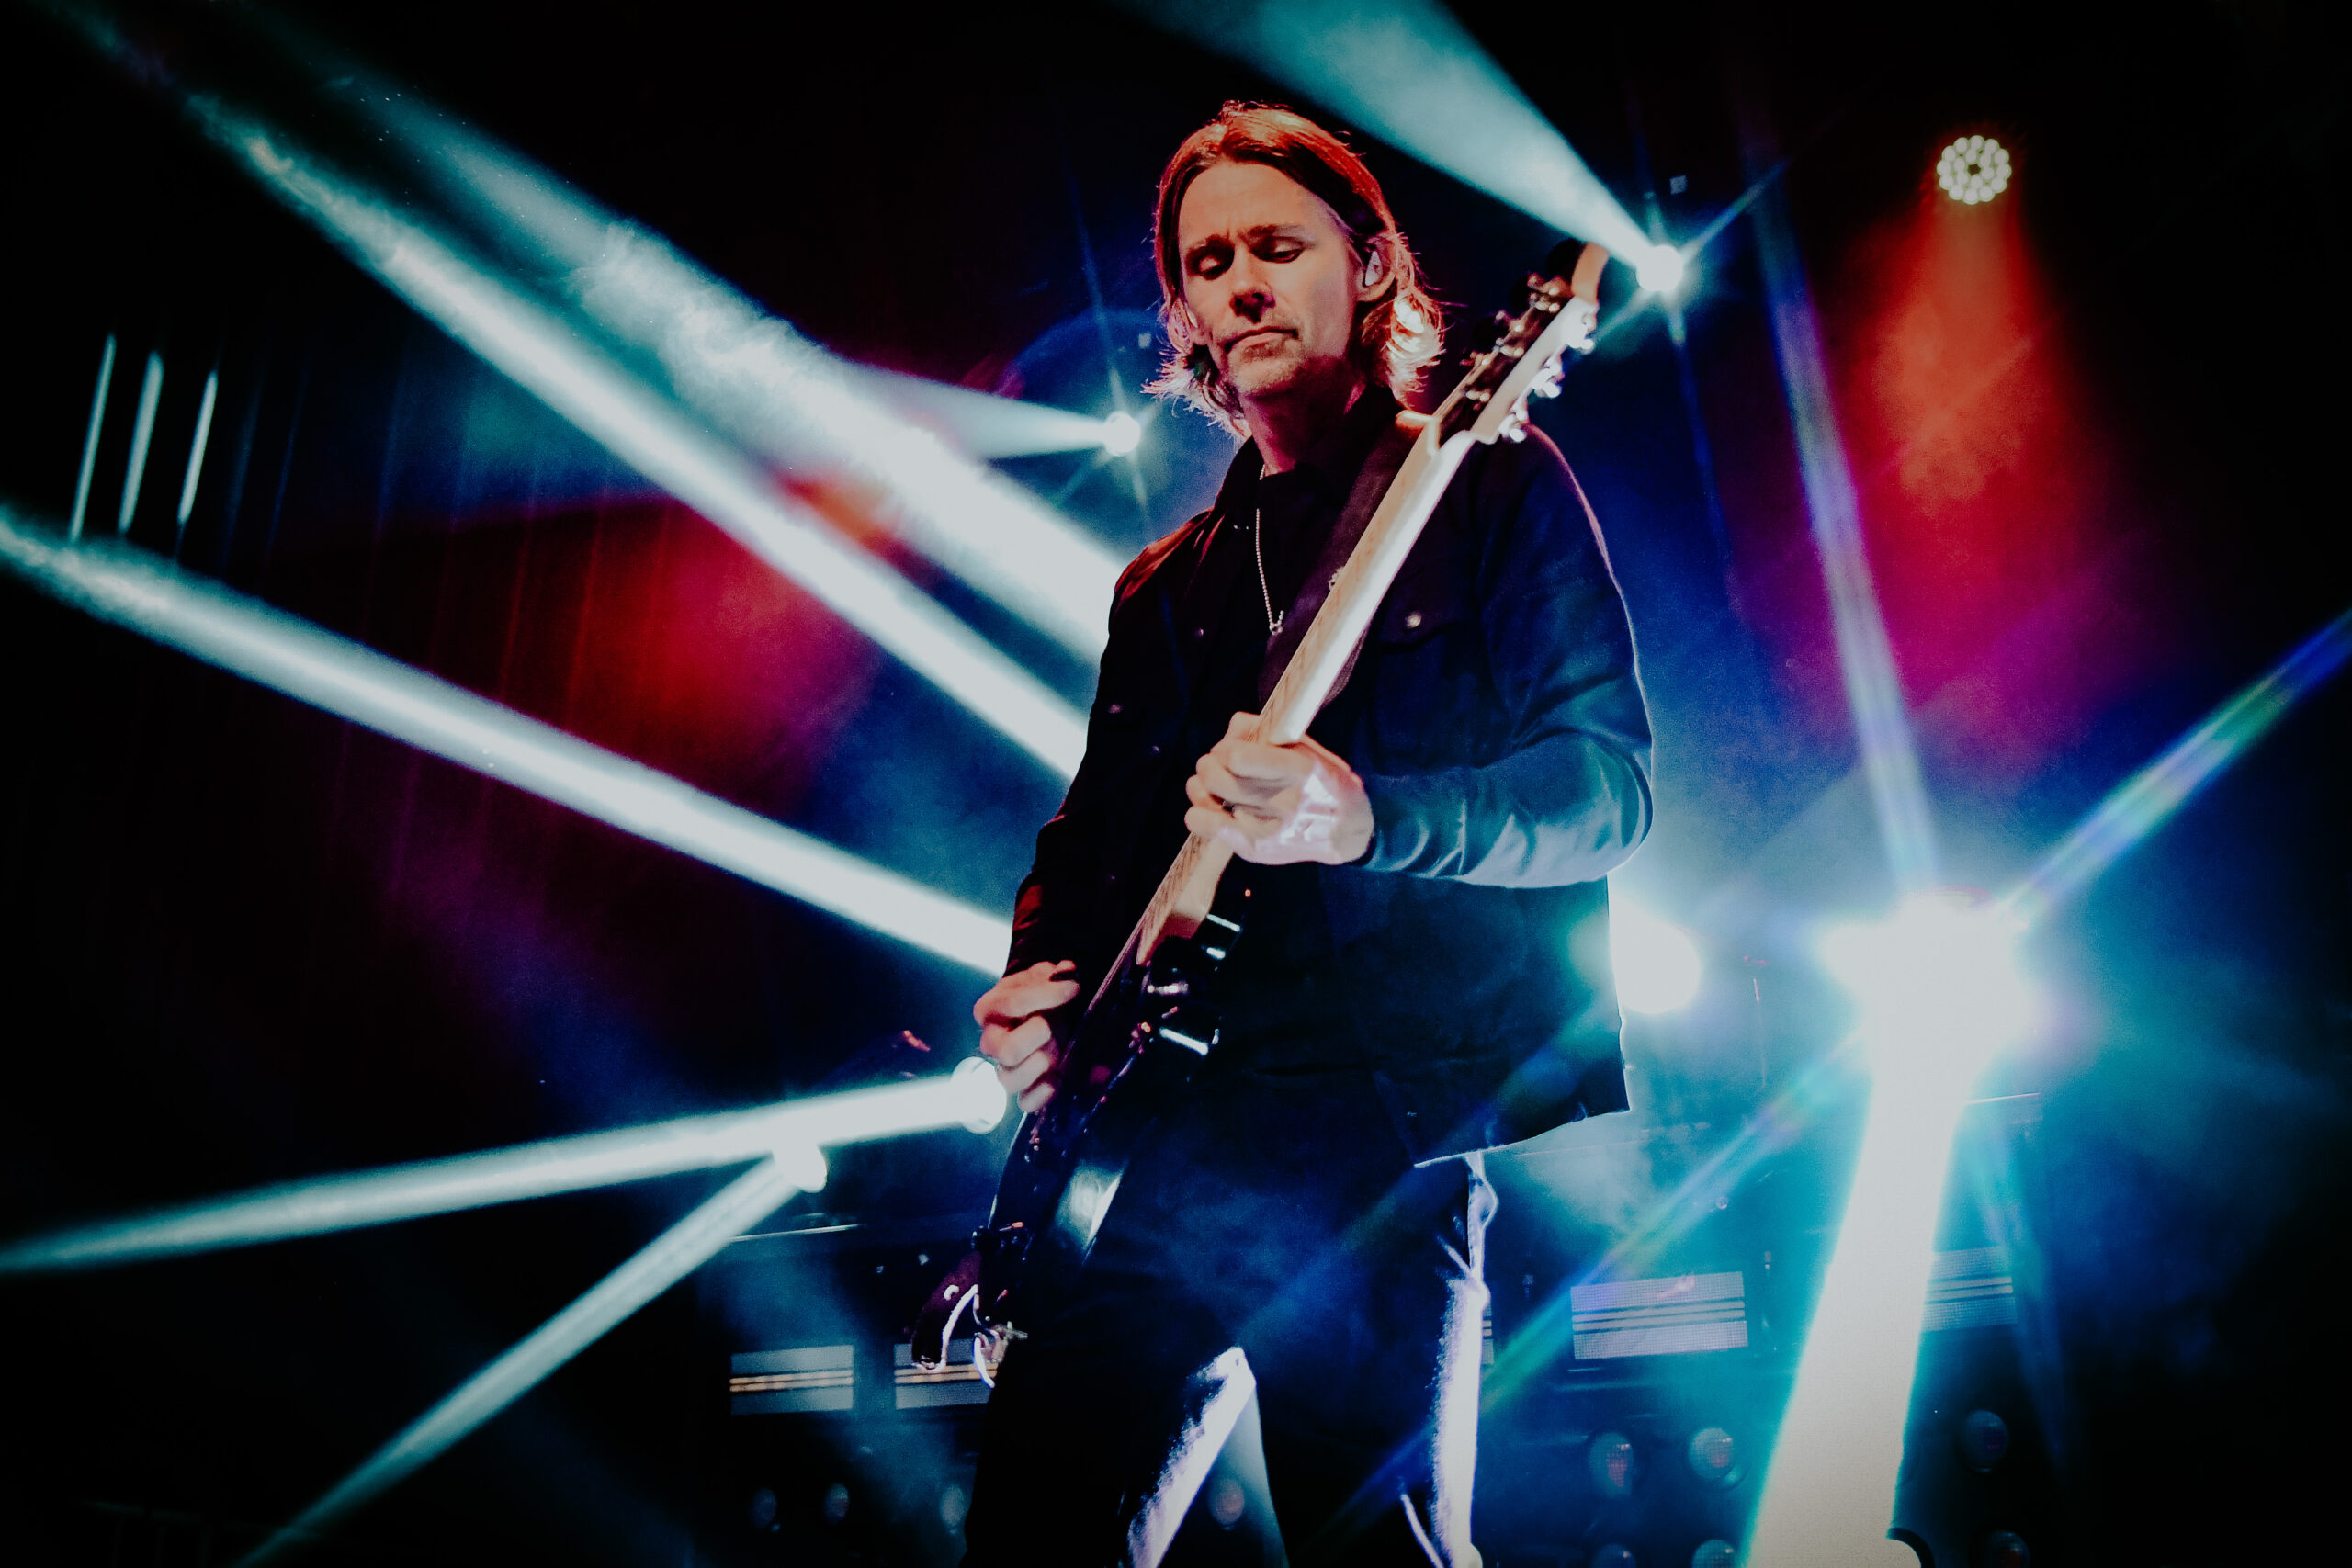 ALTER BRIDGE Announce May Headline Tour Dates With Special Guest Sevendust  - All Music Magazine